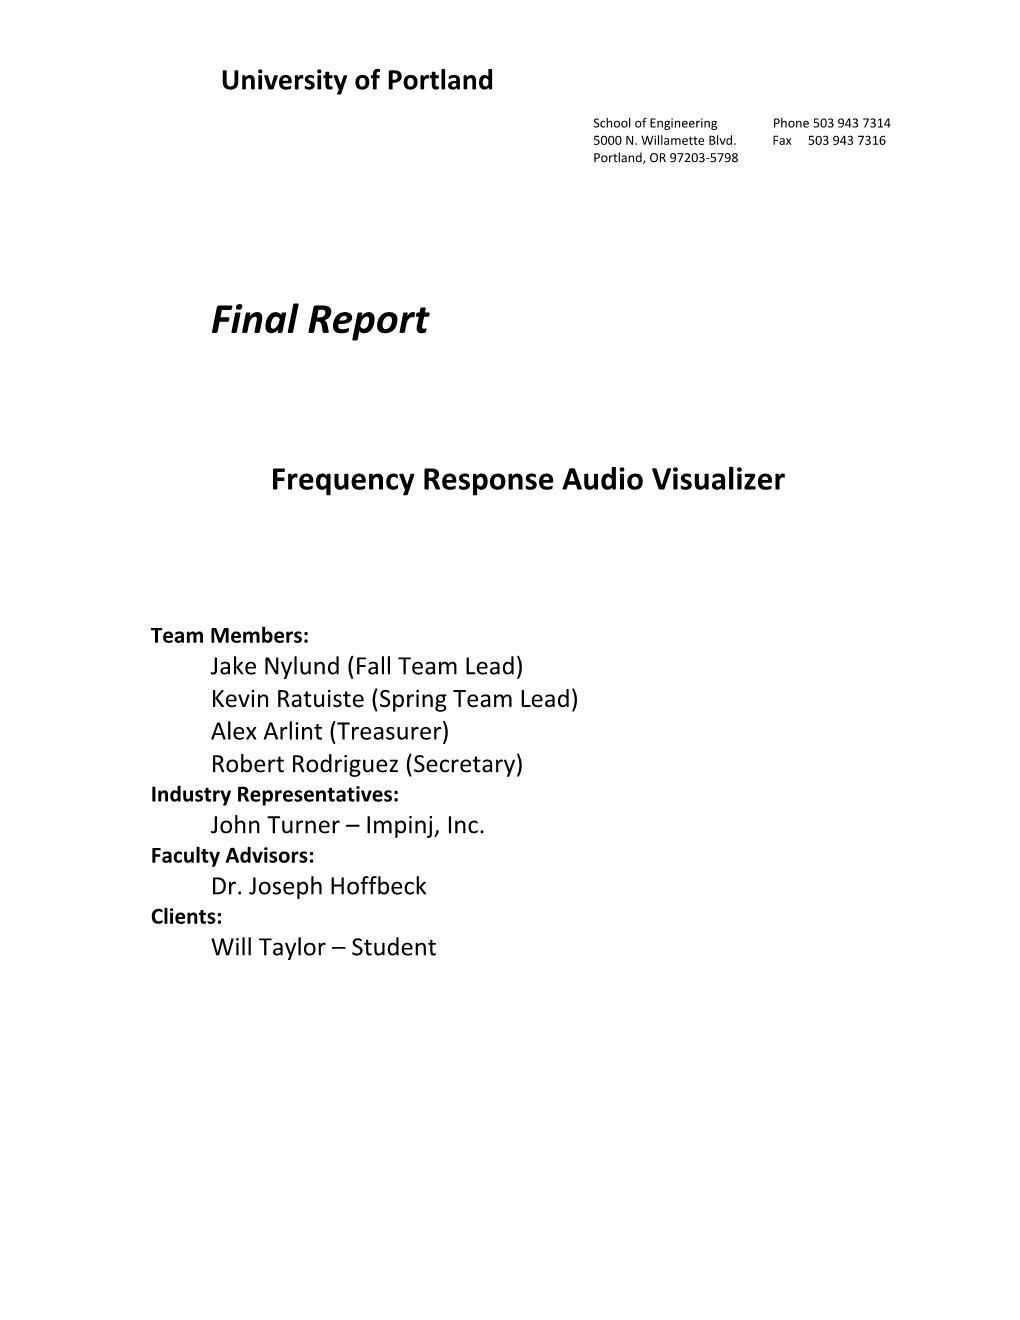 Final Report Rev. 1.10 Page 10